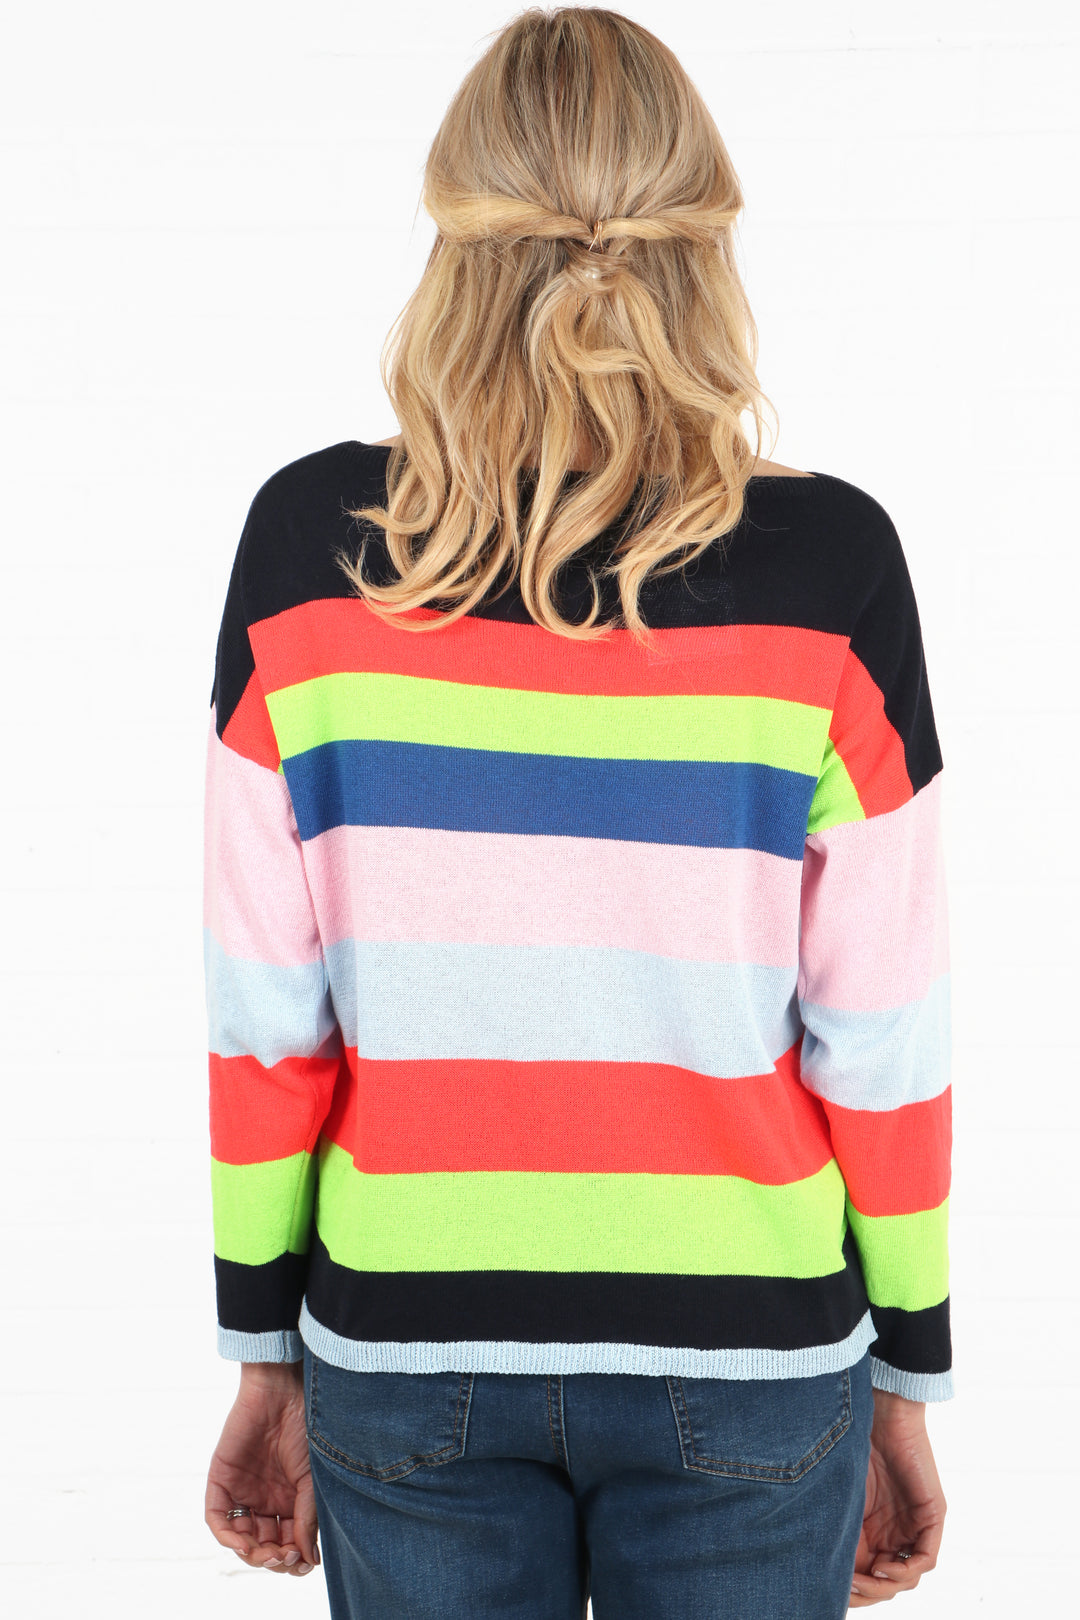 model showing the back of the stiped jumper, the stipes are navy blue, orange, neon yellow, blue, white, black and grey